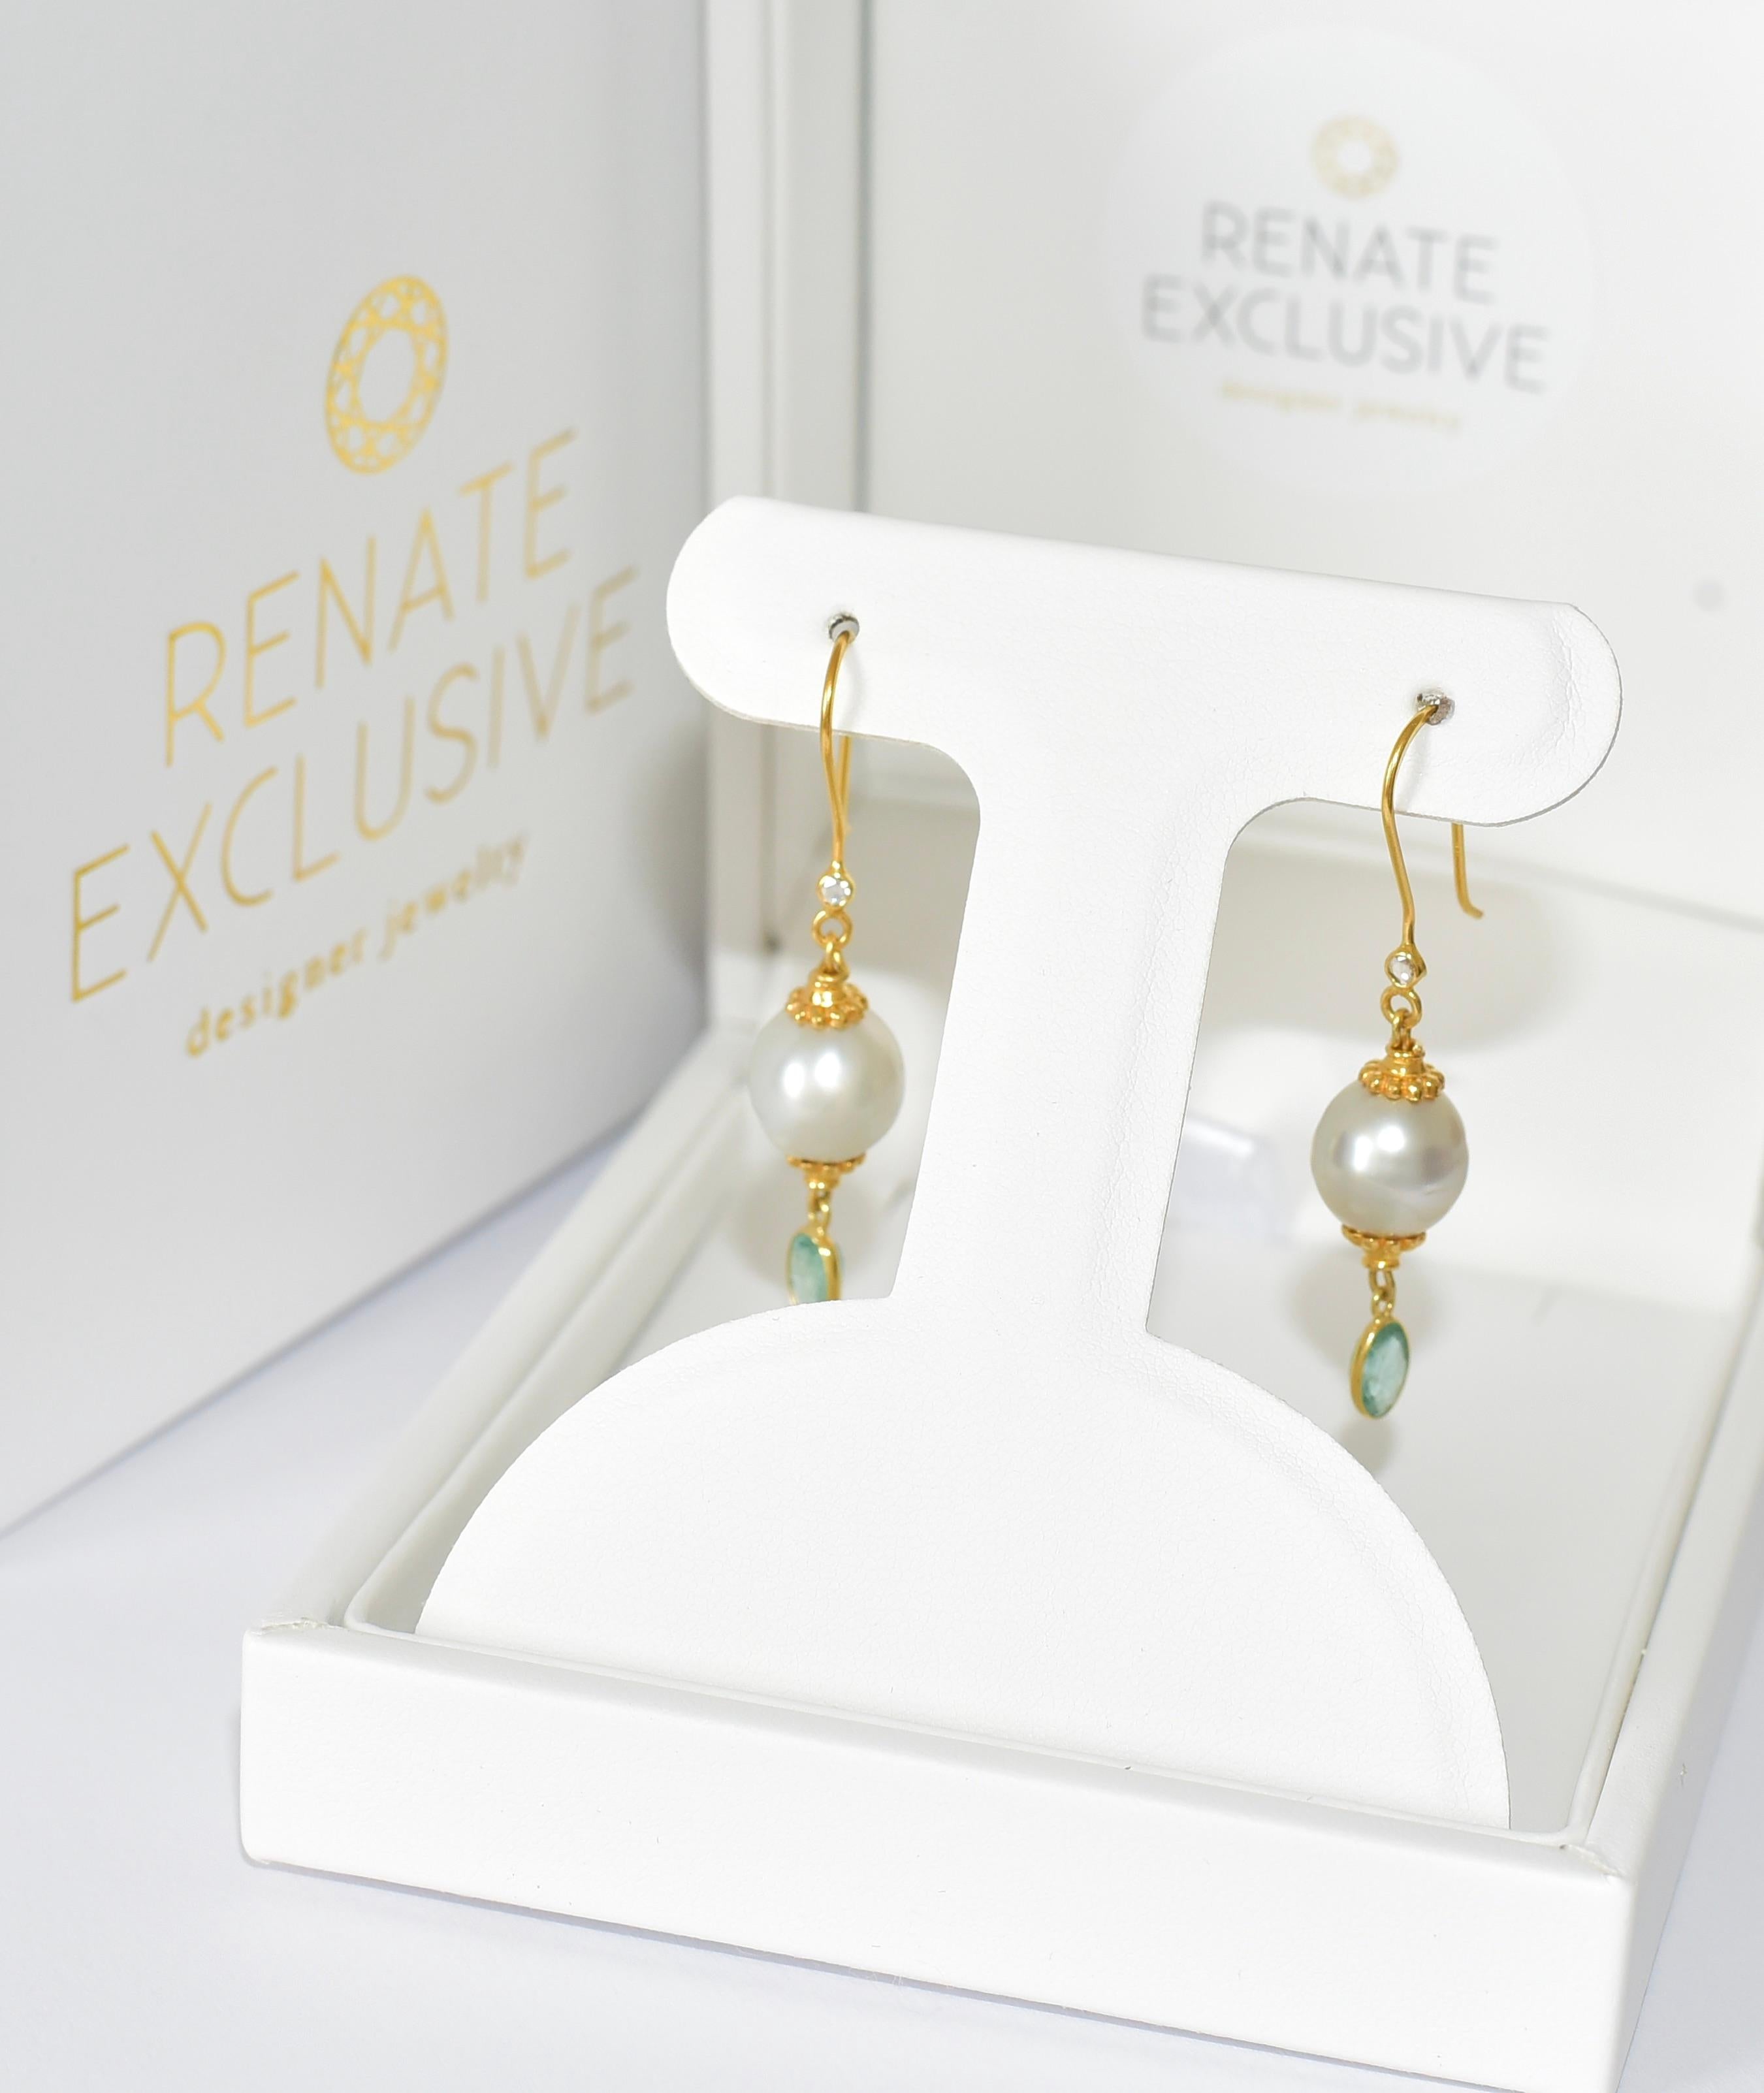 White South Sea Pearl and Natural Emerald in 18K Solid Yellow Gold. Classic look and elegant style!
Length: 1.98 inches
Pearl size: 10,6mm x 11,6mm
Earrings Post: Fancy 18K solid gold ear-wires with fine rose cut diamonds and beautiful details! 0.05